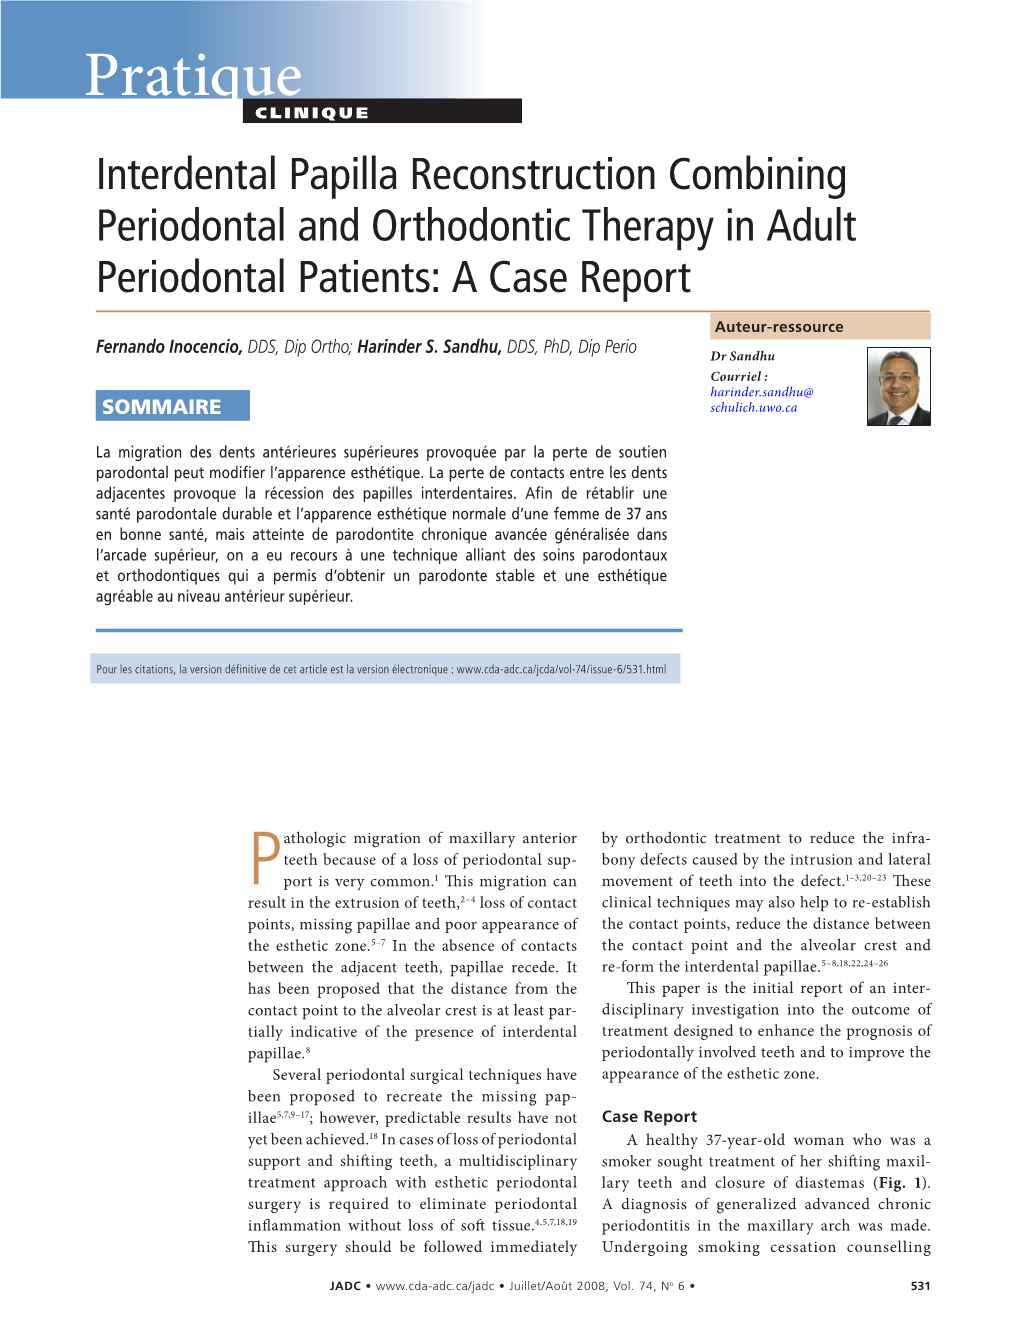 Interdental Papilla Reconstruction Combining Periodontal and Orthodontic Therapy in Adult Periodontal Patients: a Case Report